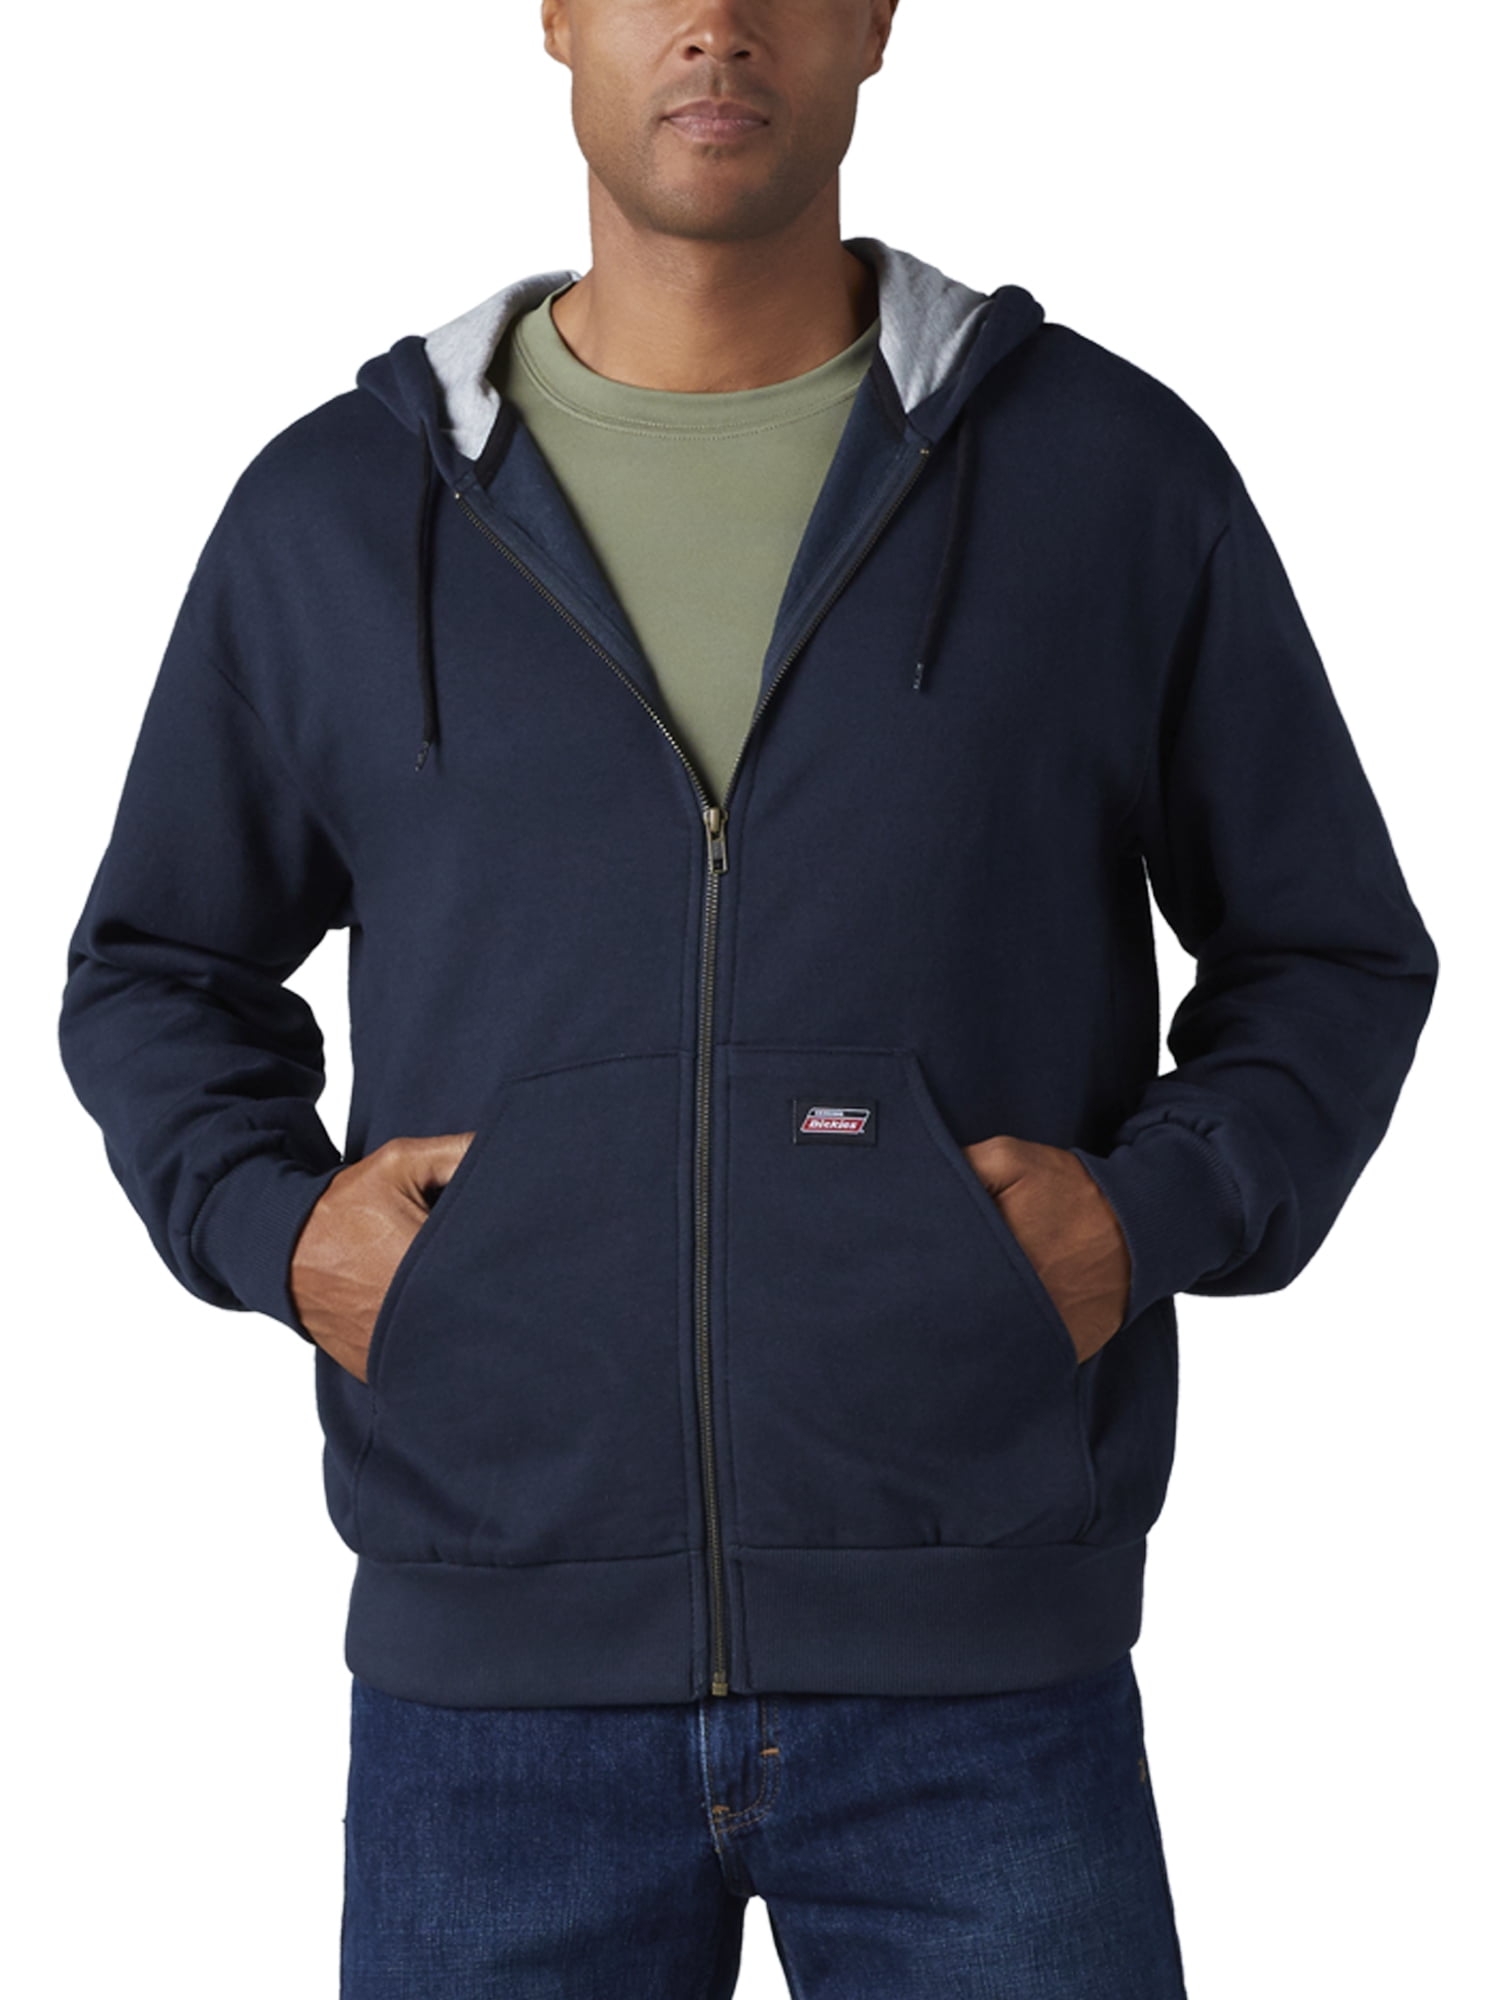 Mens Clothing Jackets Casual jackets for Men DSquared² Denim X Smiley® in Navy Blue Blue 